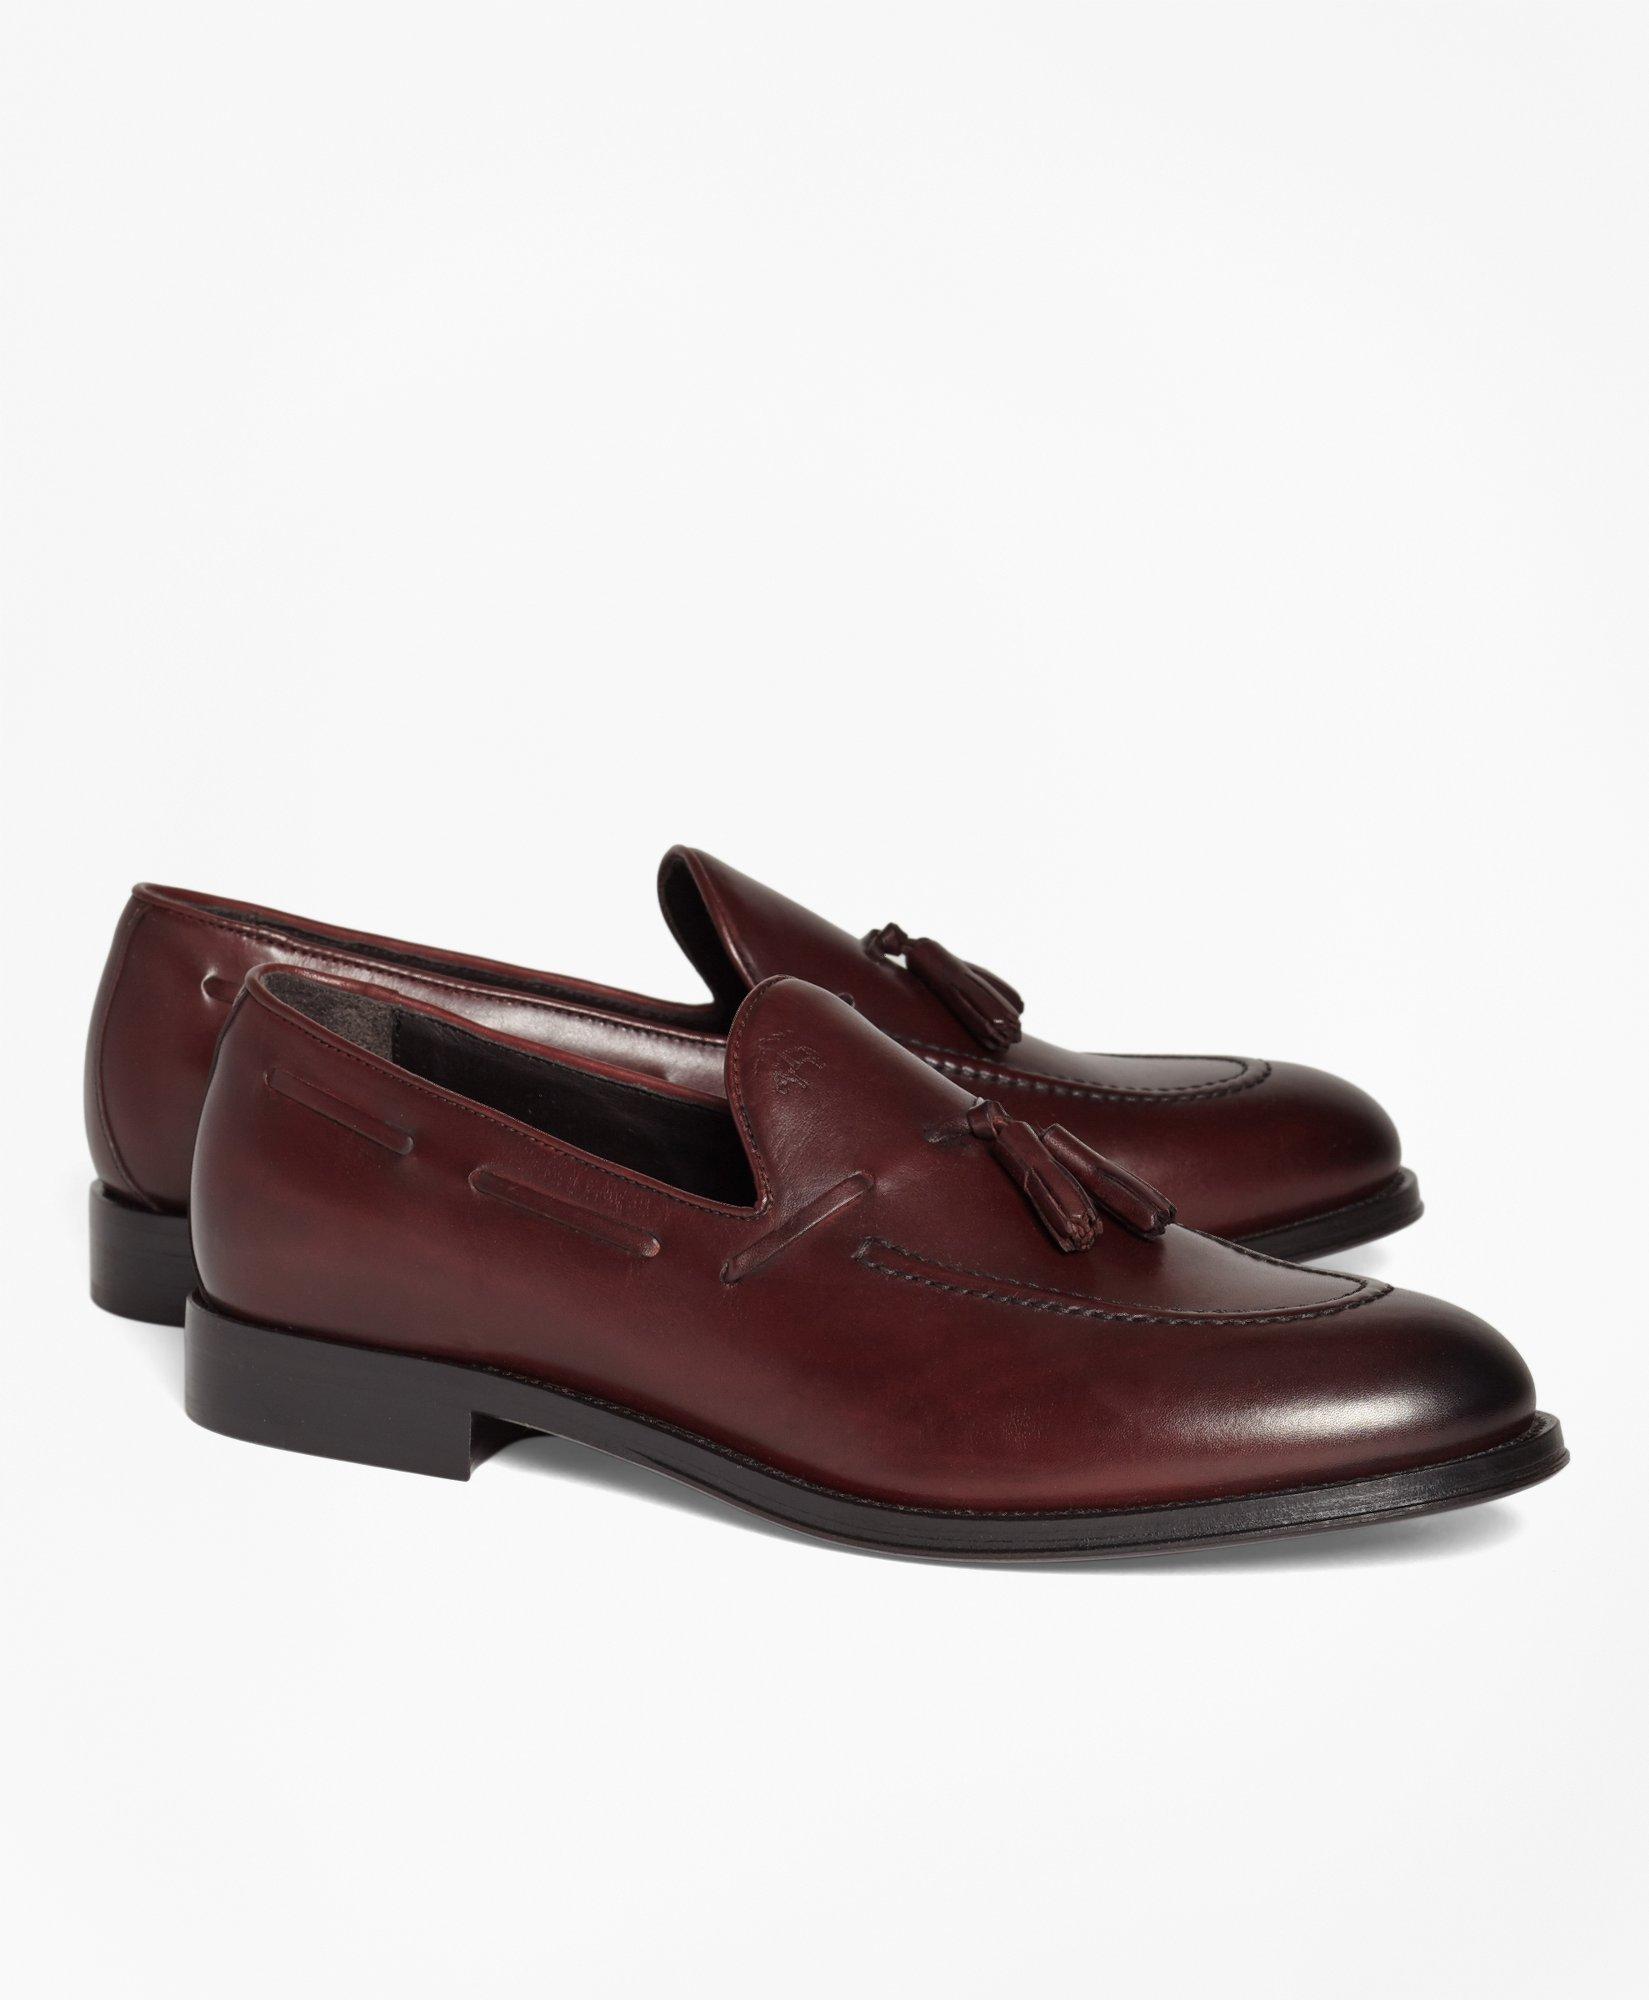 Brooks Brothers 1818 Footwear Leather Tassel Loafers | Burgundy | Size 8 D